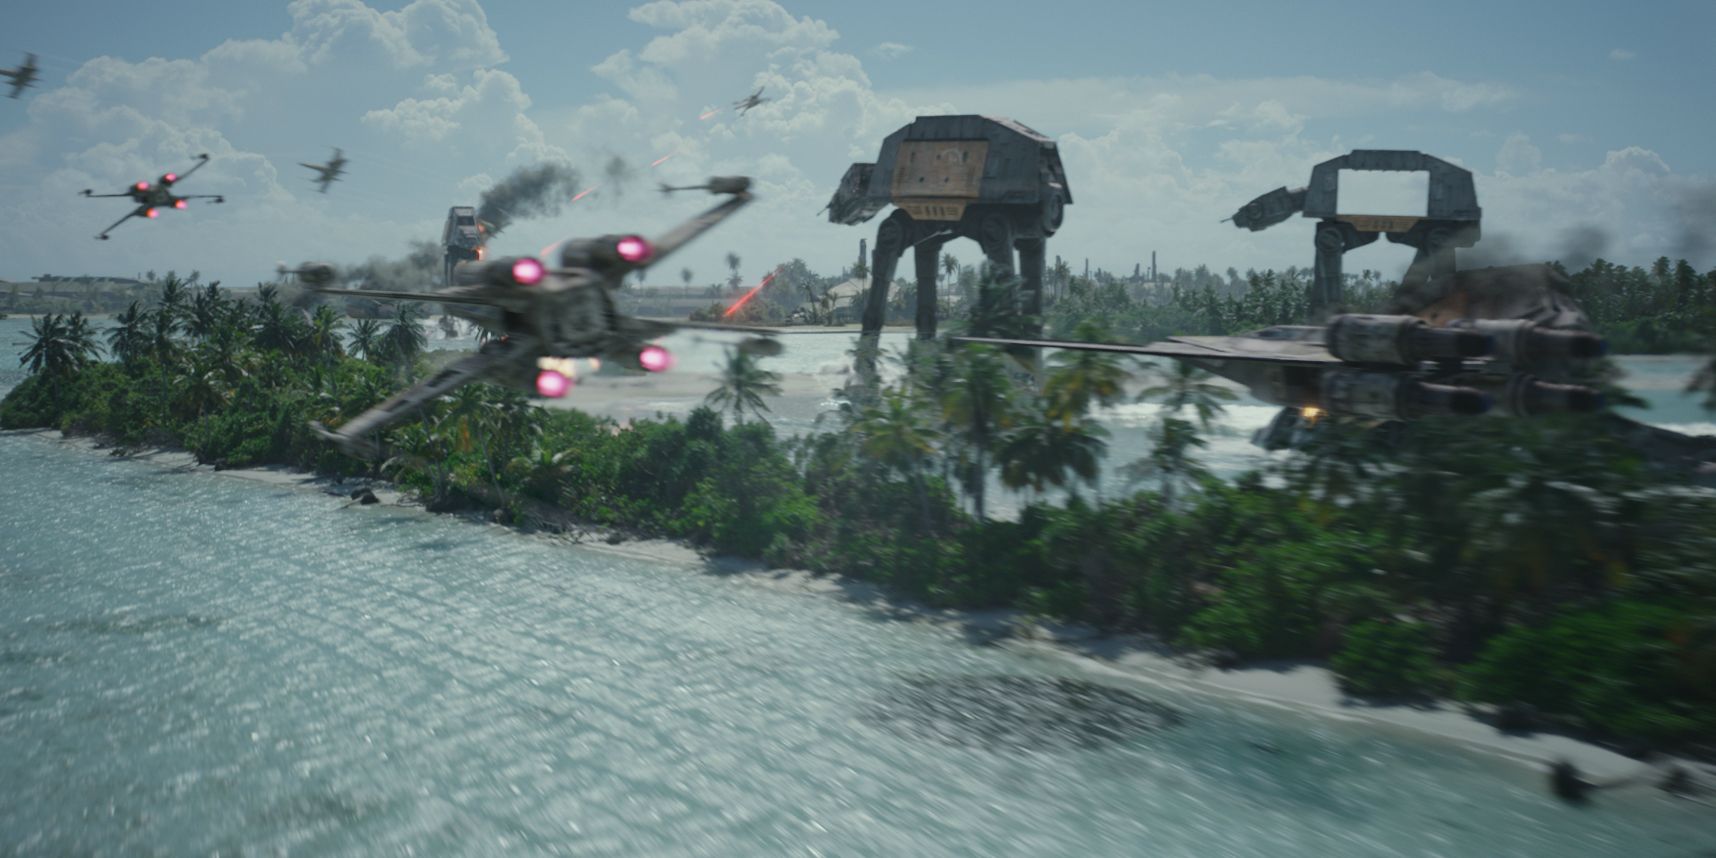 X-wing fighters take on AT-ACT walkers during the Battle of Scarif in Rogue One: A Star Wars Story